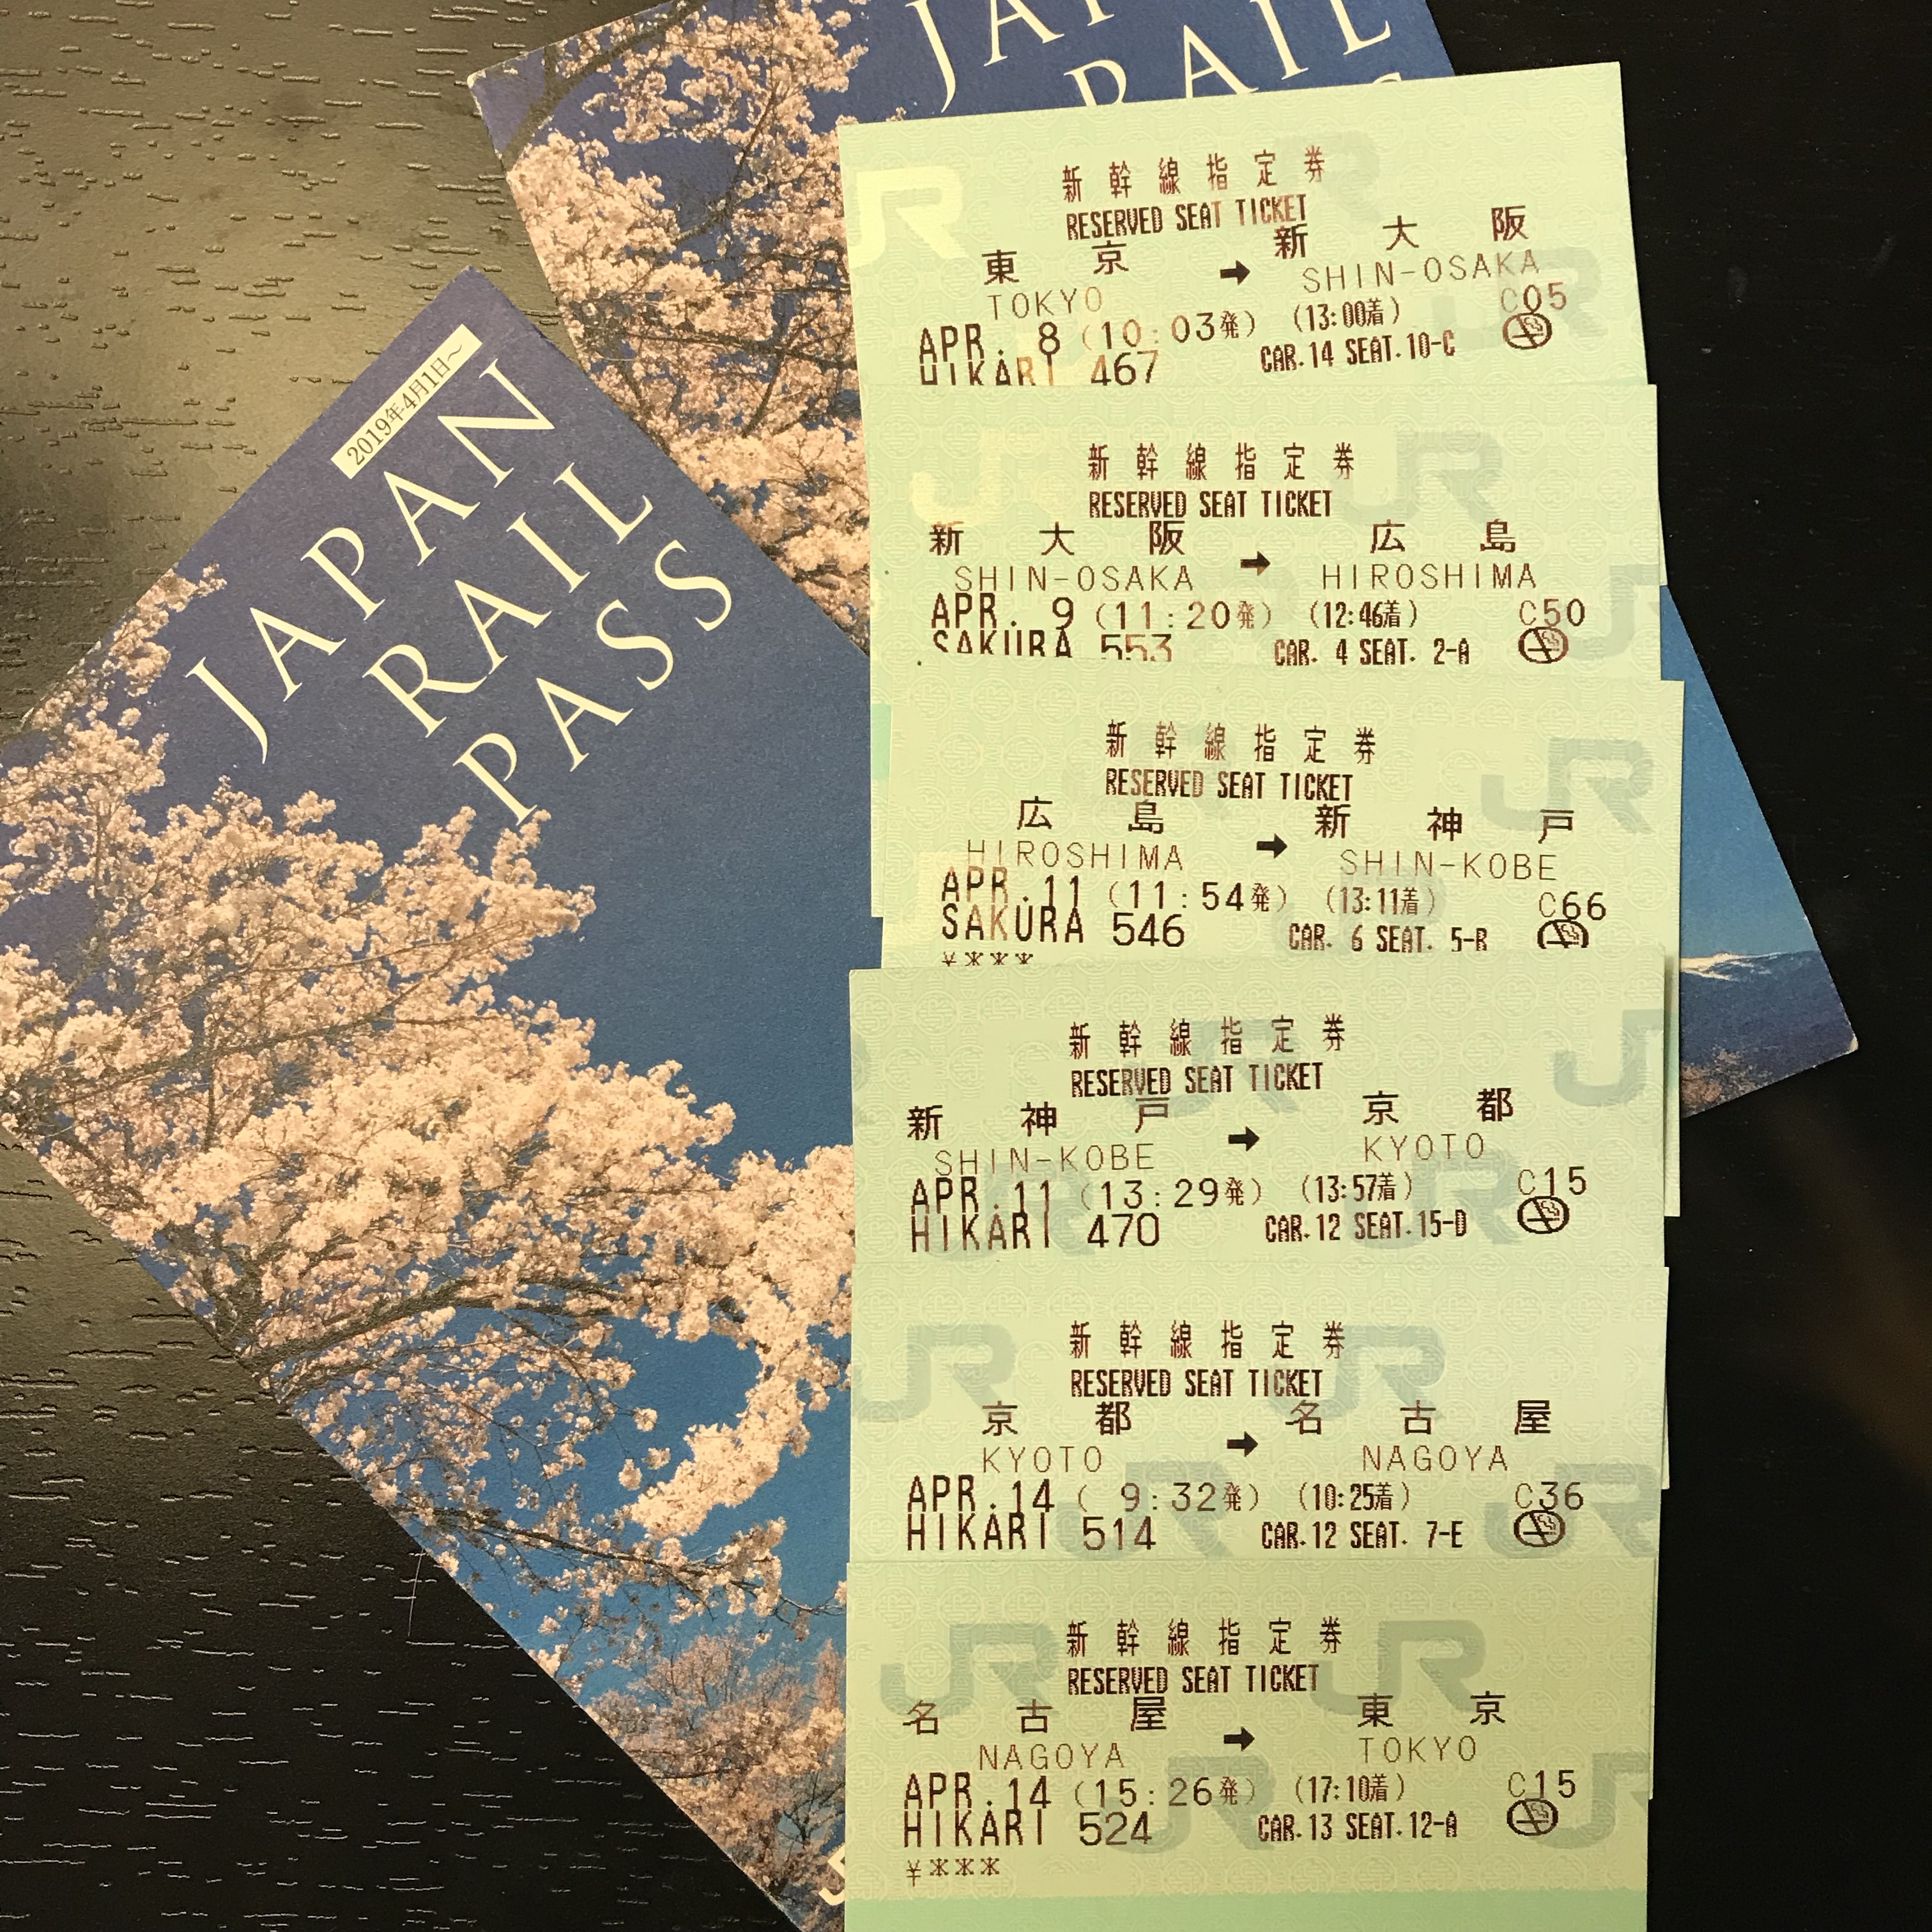 JR Pass and train tickets for the ultimate japan travel guide